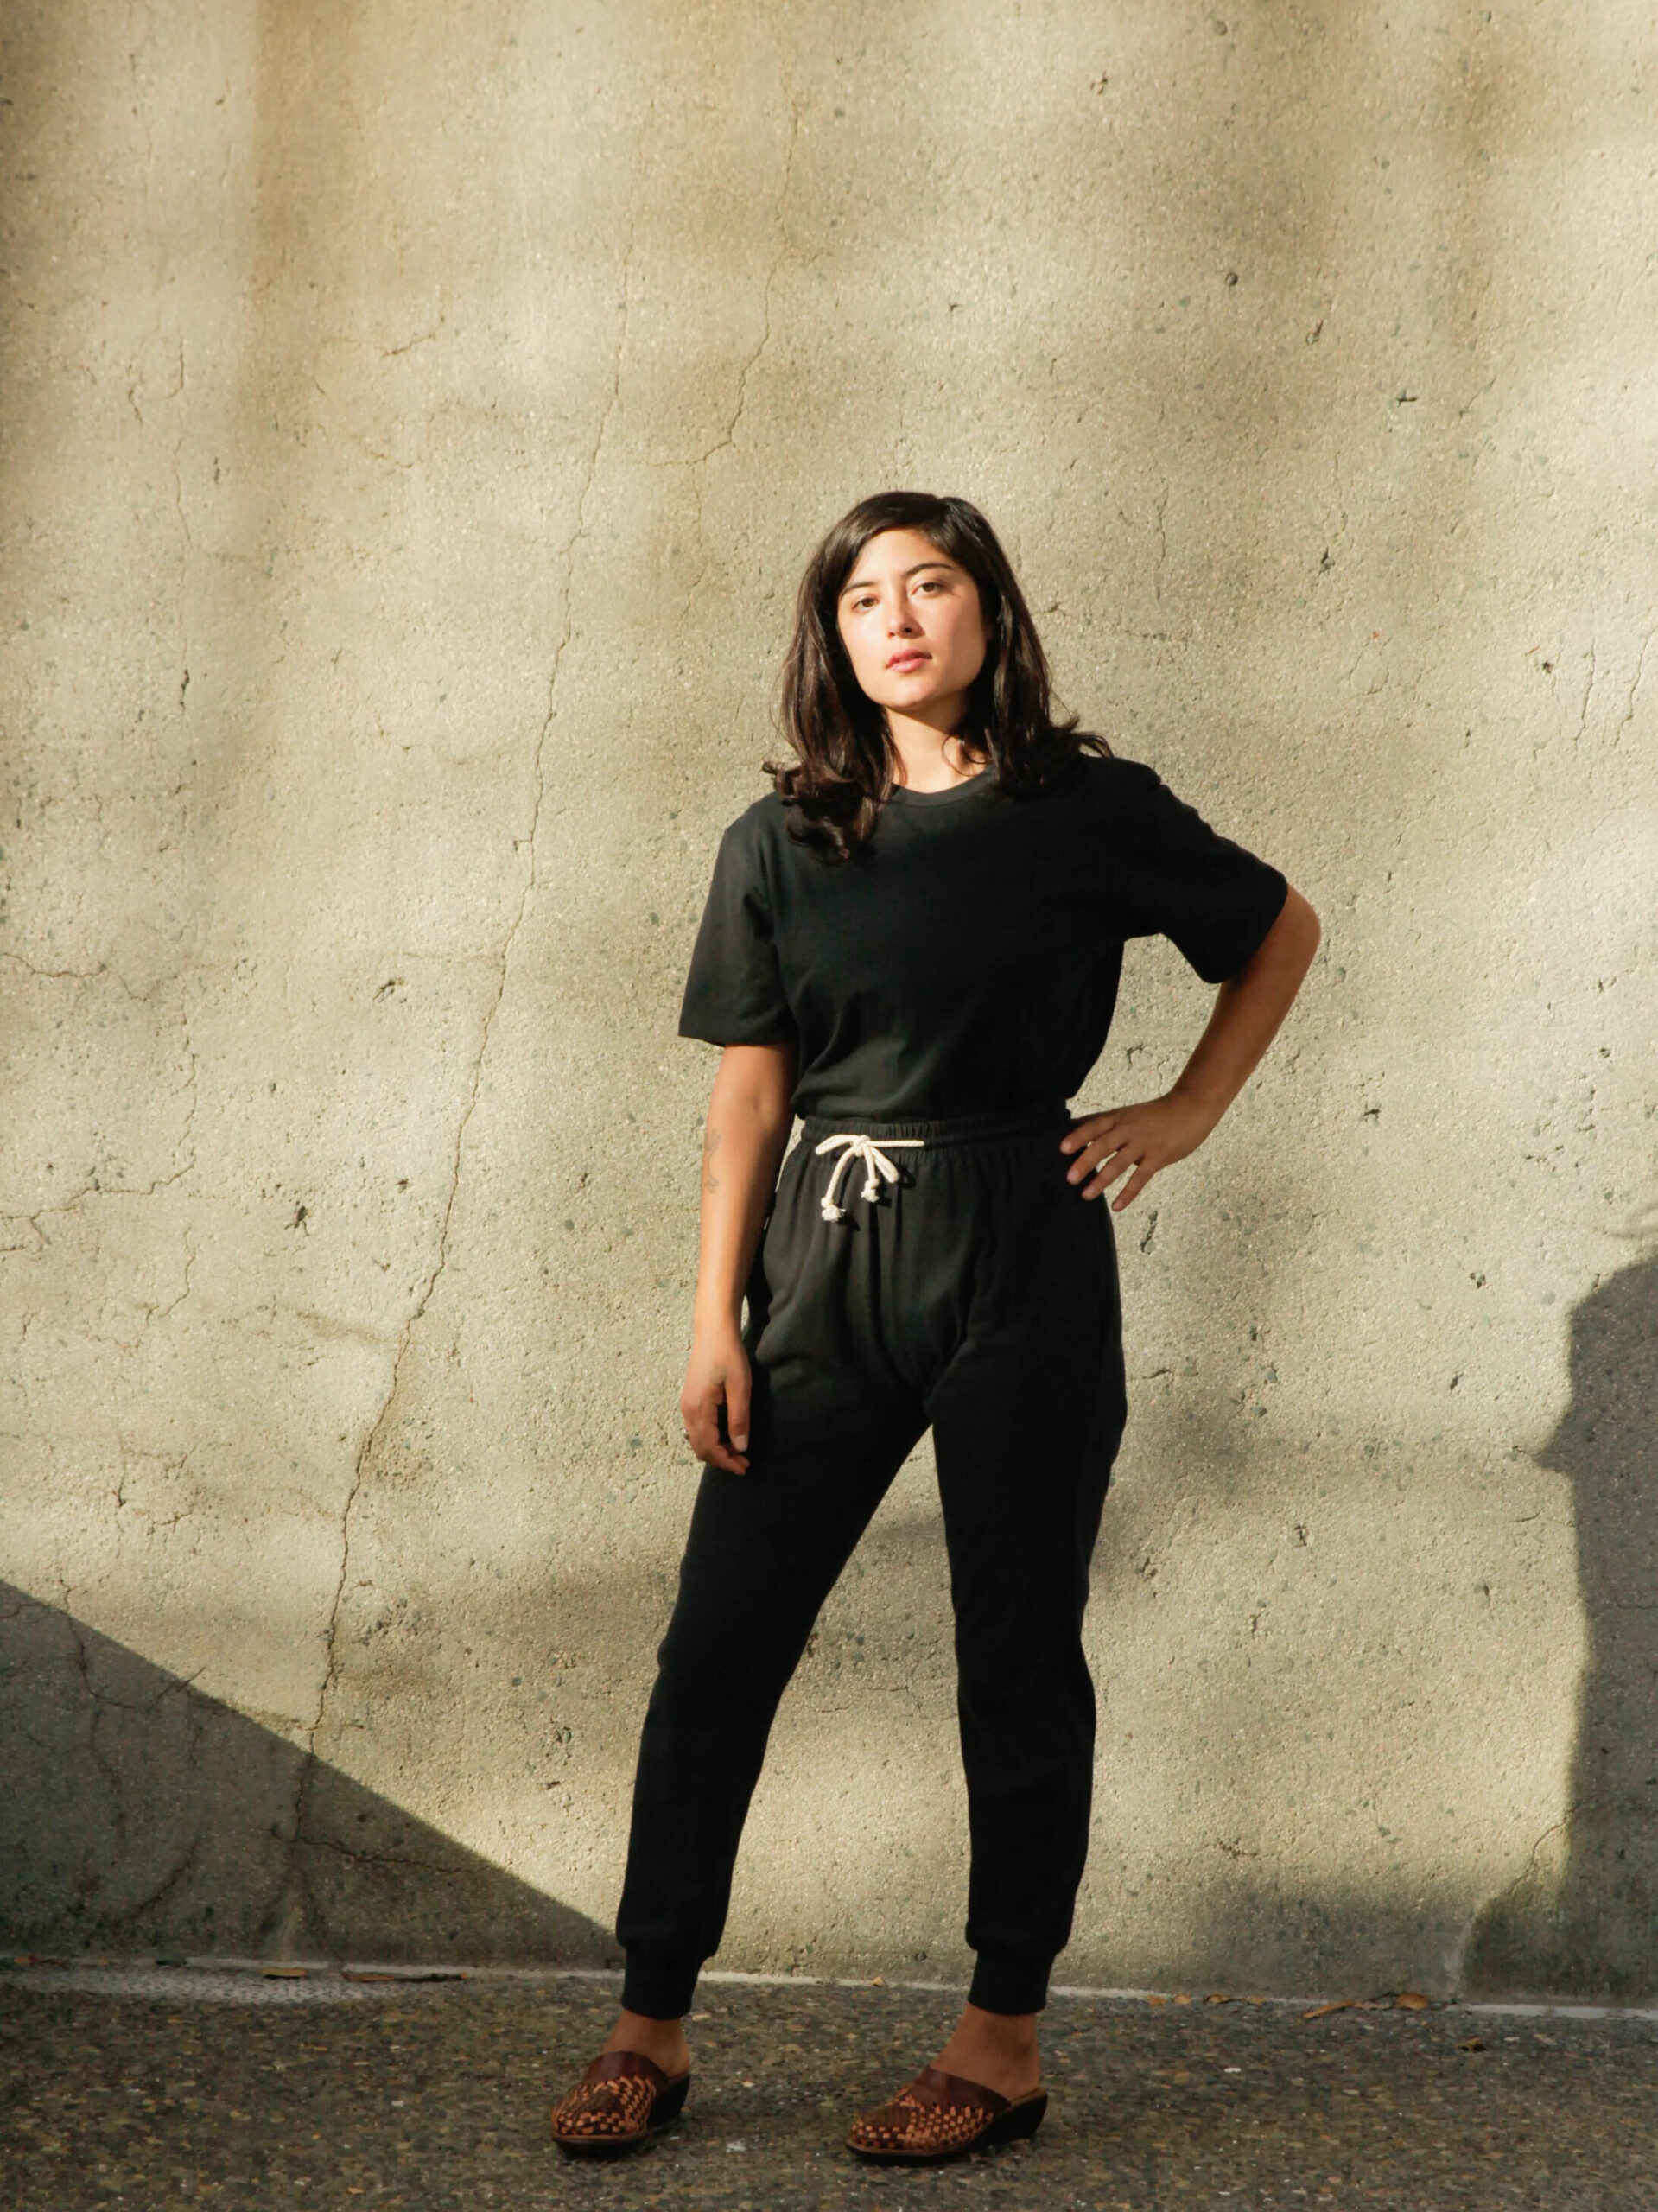 A woman in black standing next to a concrete wall.